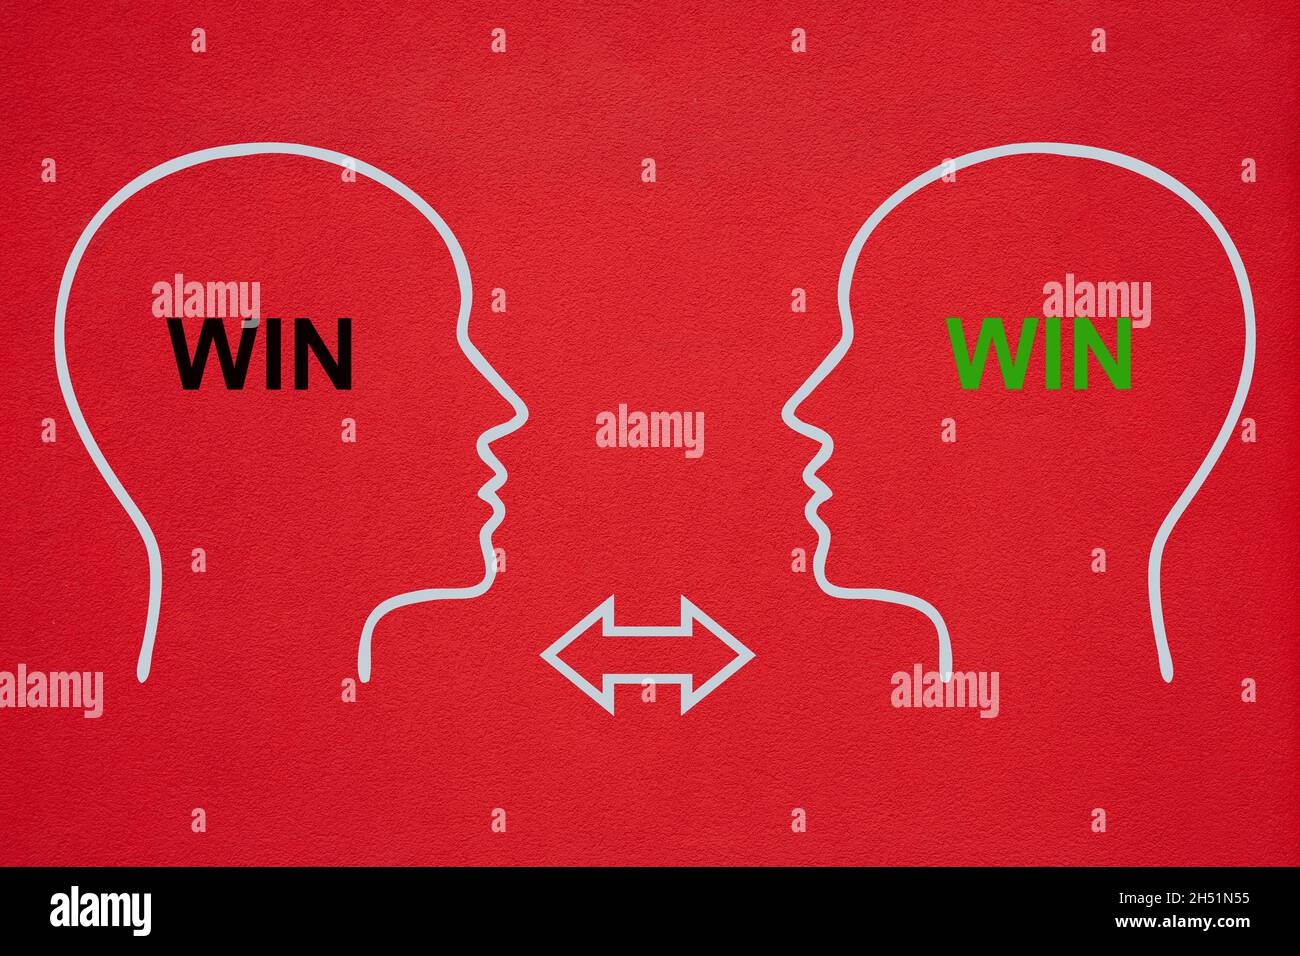 Two outlines of heads in white face each other. In the faces the Text WIN WIN is written in black and gree on the crimson background. Two arrows point Stock Photo